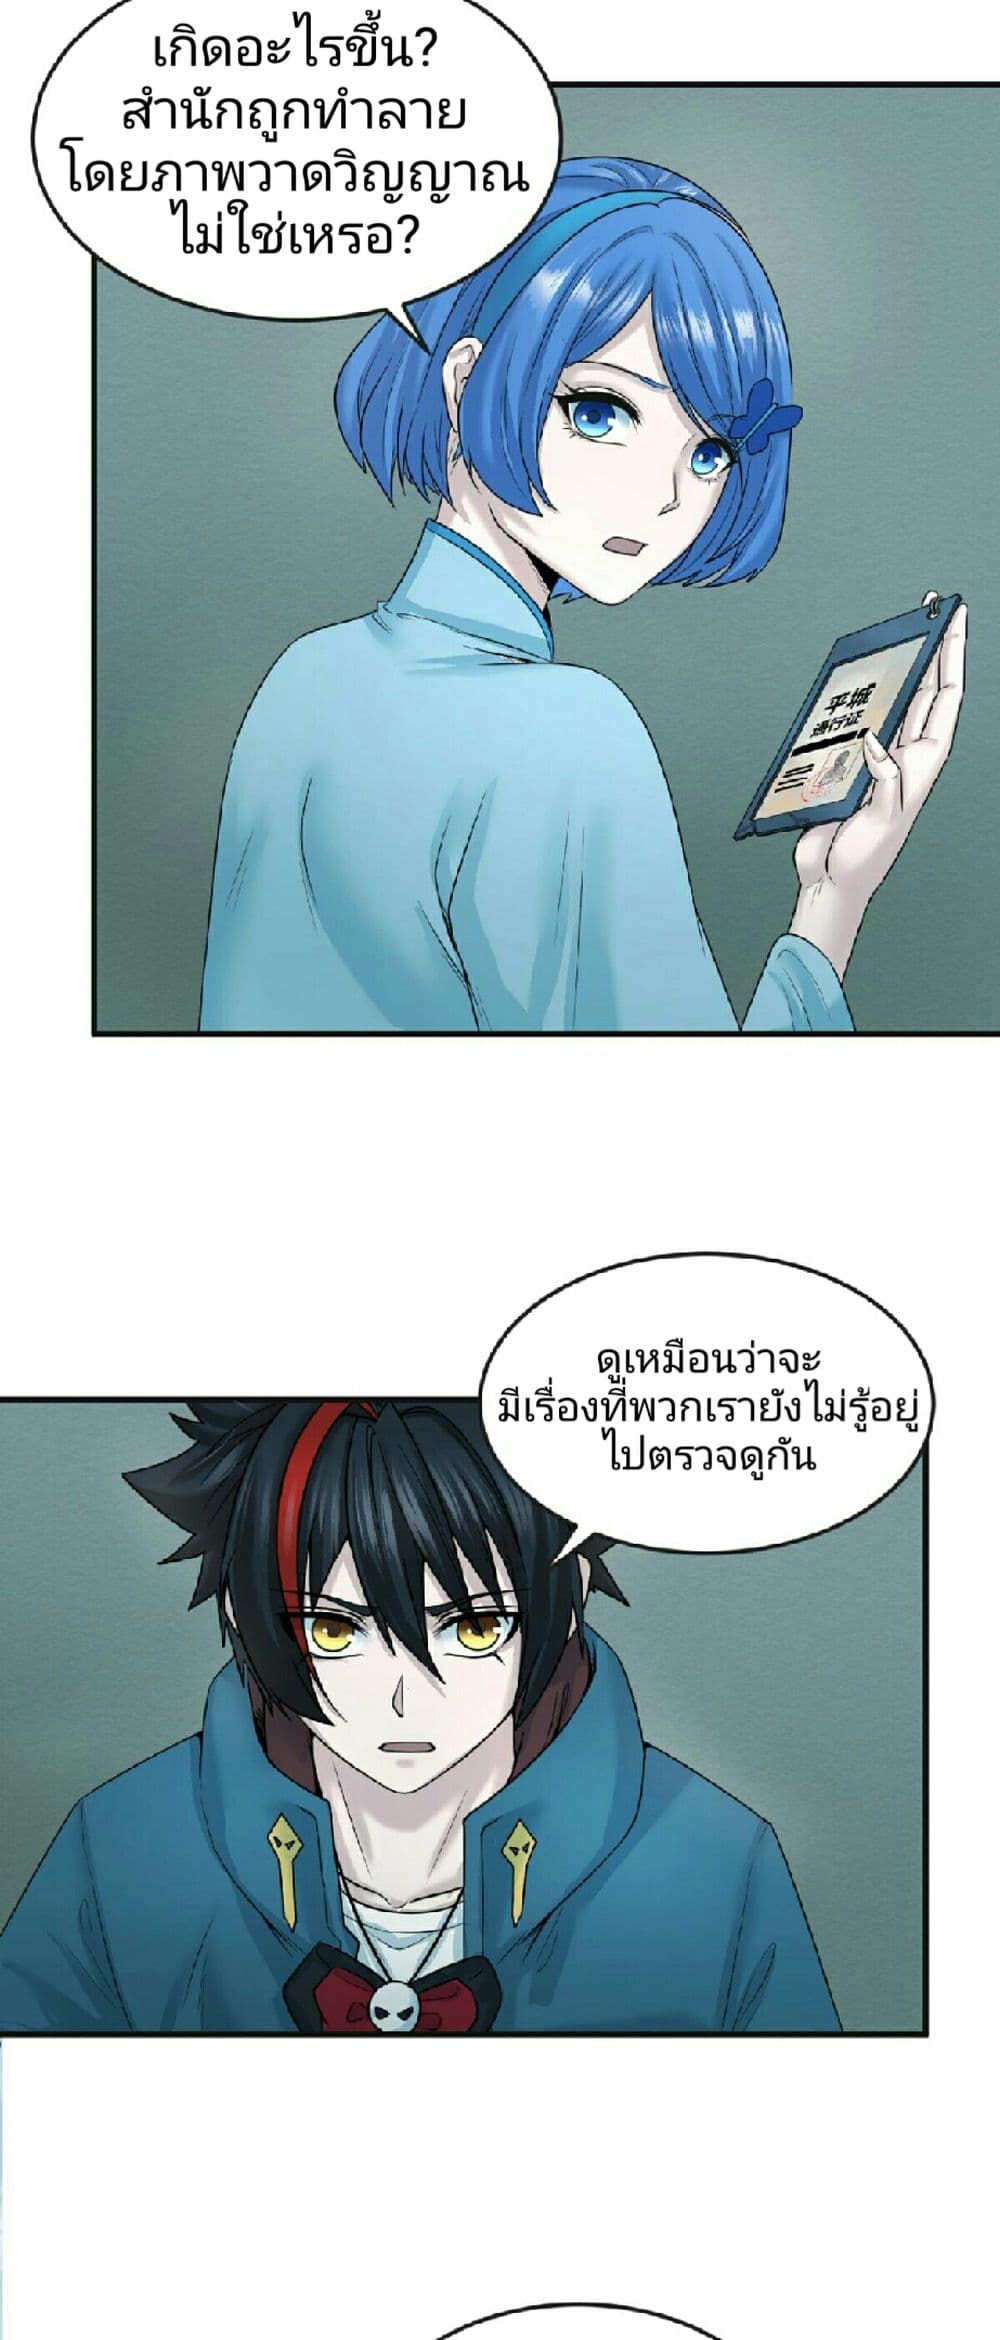 The Age of Ghost Spirits à¸à¸­à¸à¸à¸µà¹ 50 (5)